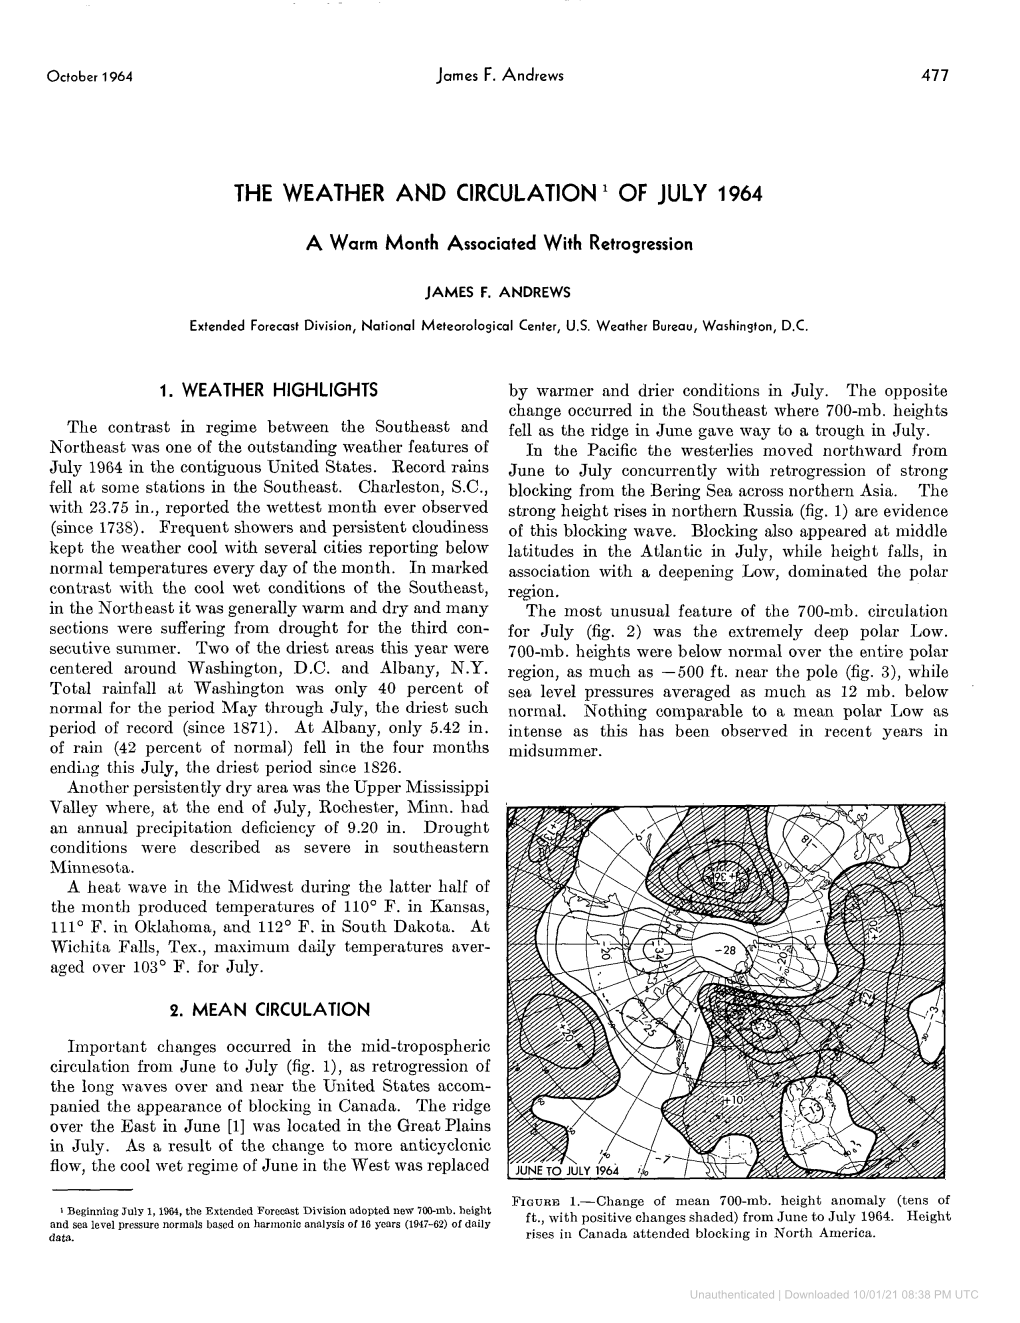 The Weather and Circulation of July 1964